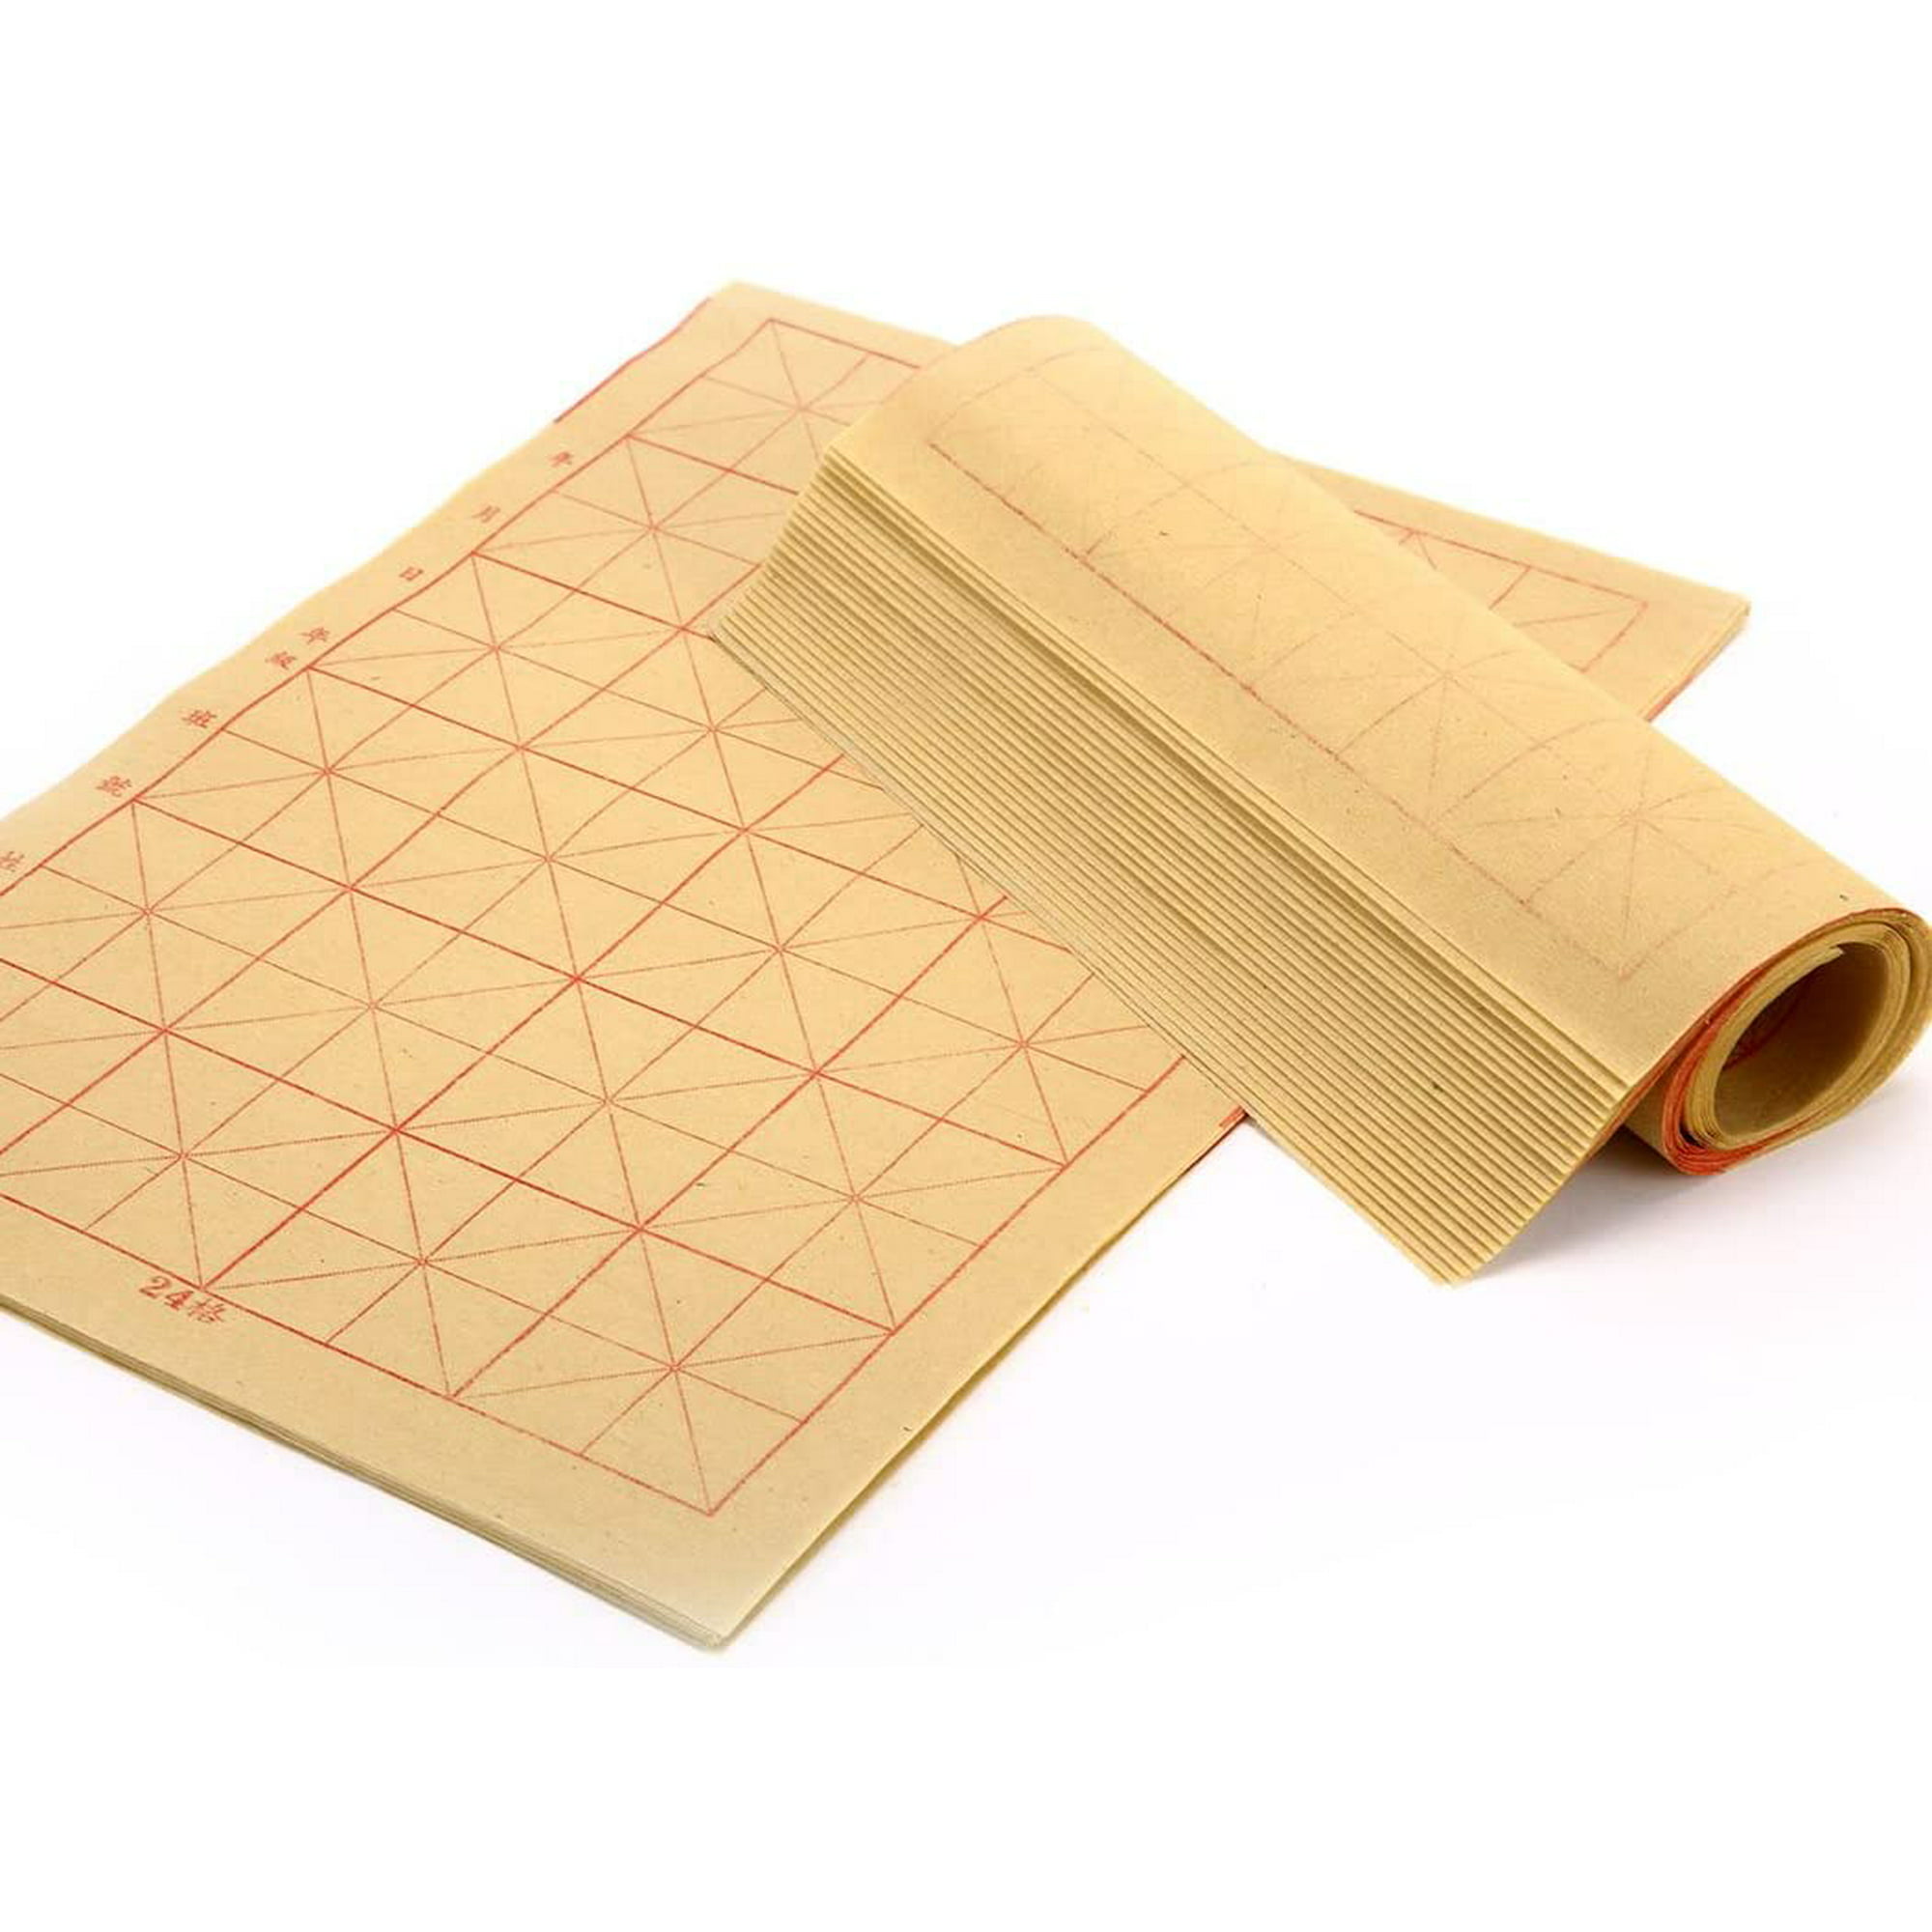 Selecting Calligraphy Paper